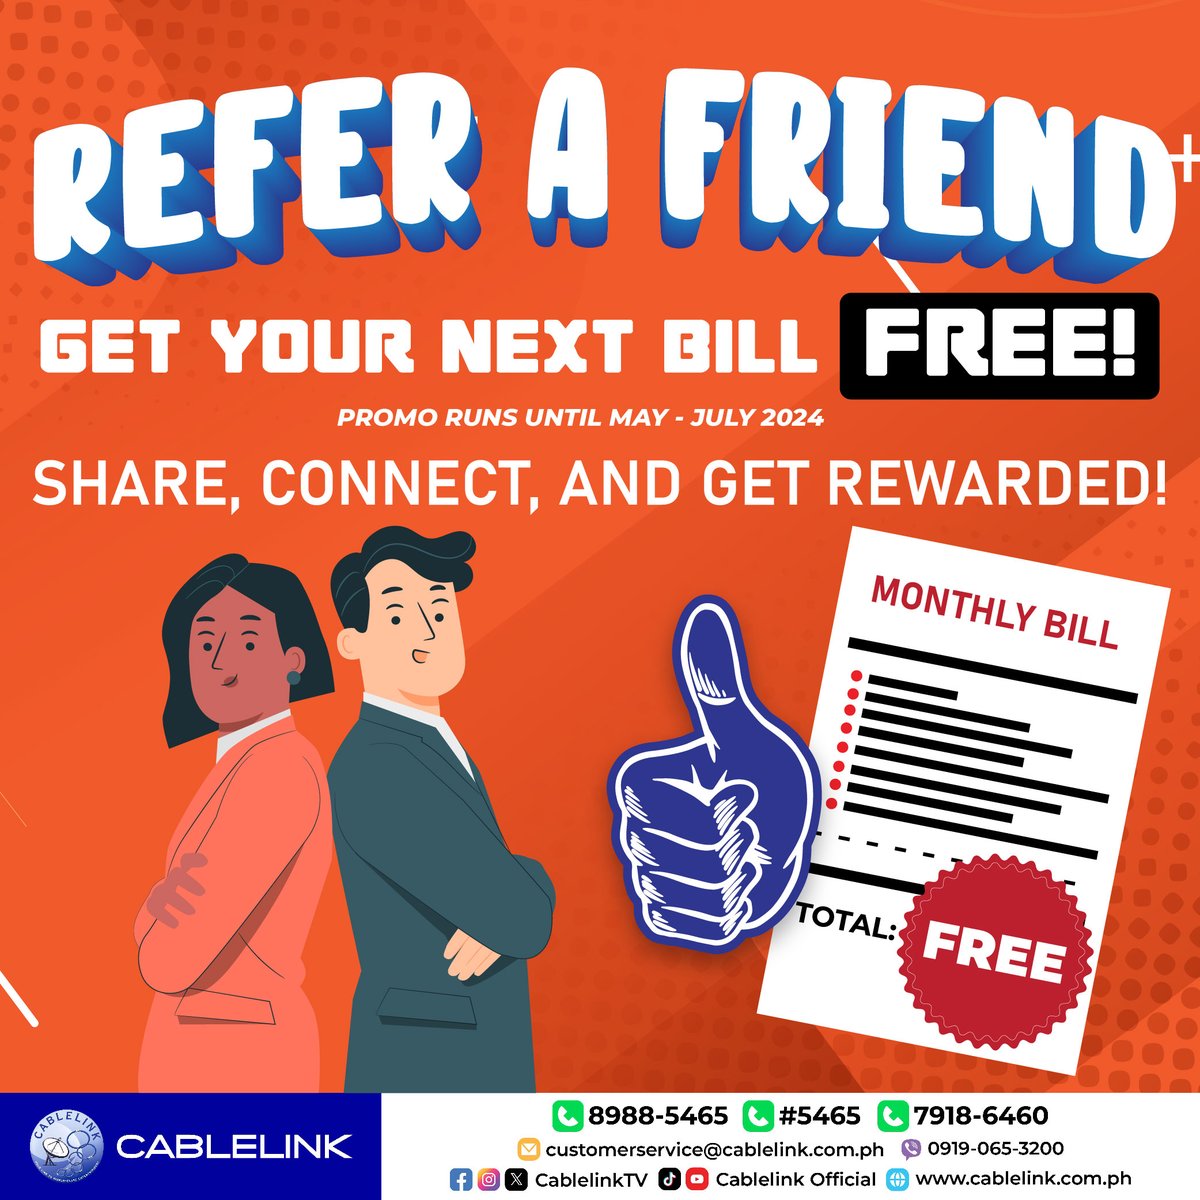 SHARE, CONNECT, AND GET REWARDED!

#referafriend
#CablelinkTV